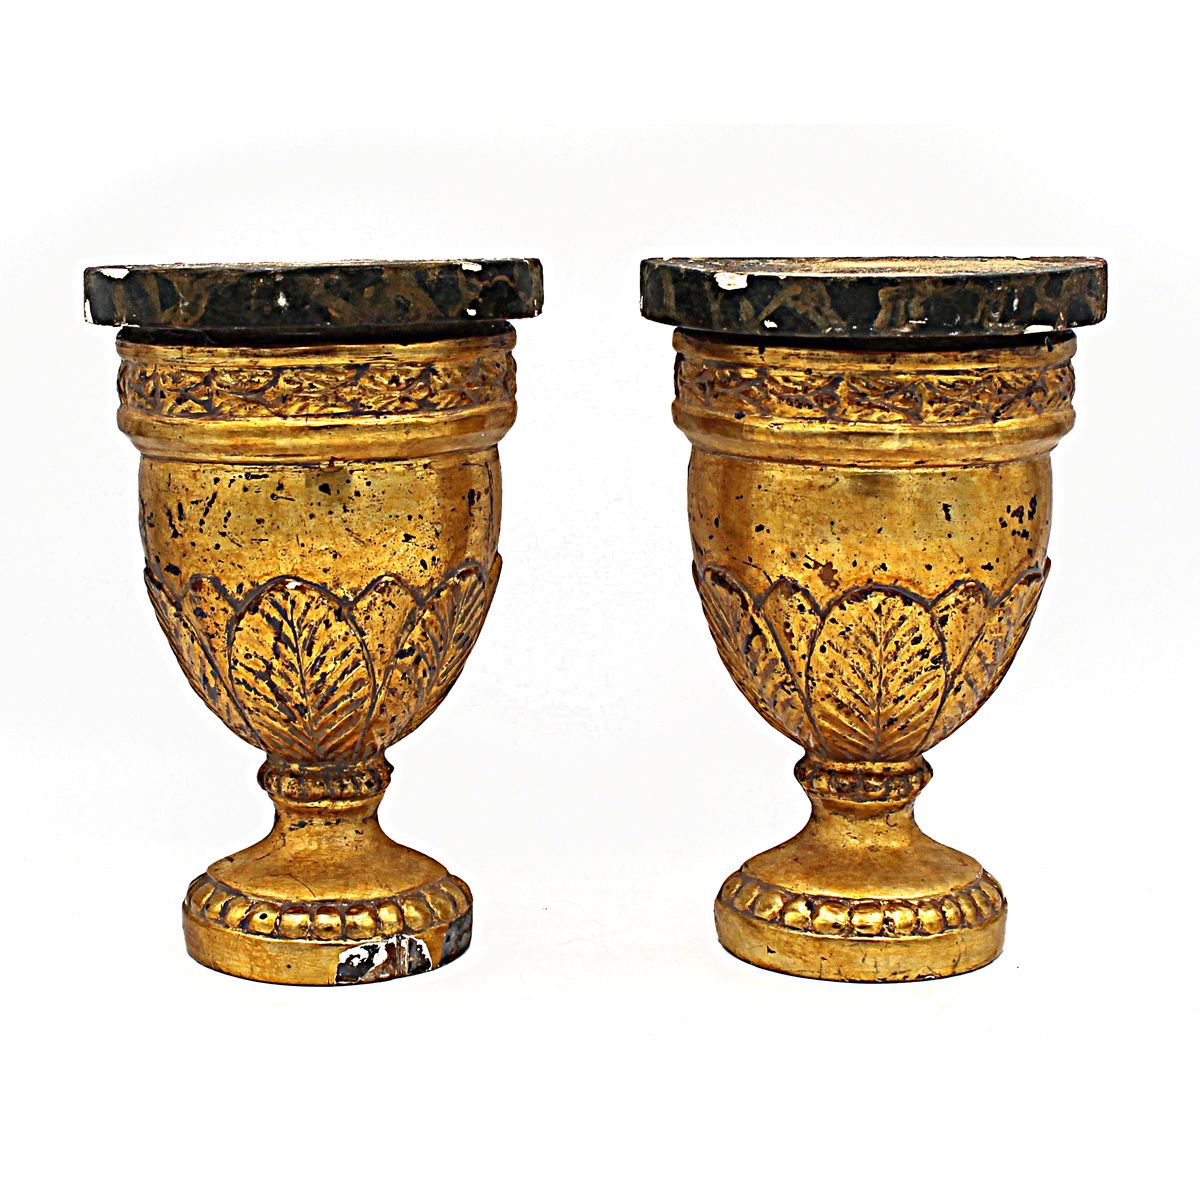 COPPIA DI MENSOLE - COUPLE OF SHELVES Carved and gilded wood. Sicily. 19th centu&hellip;